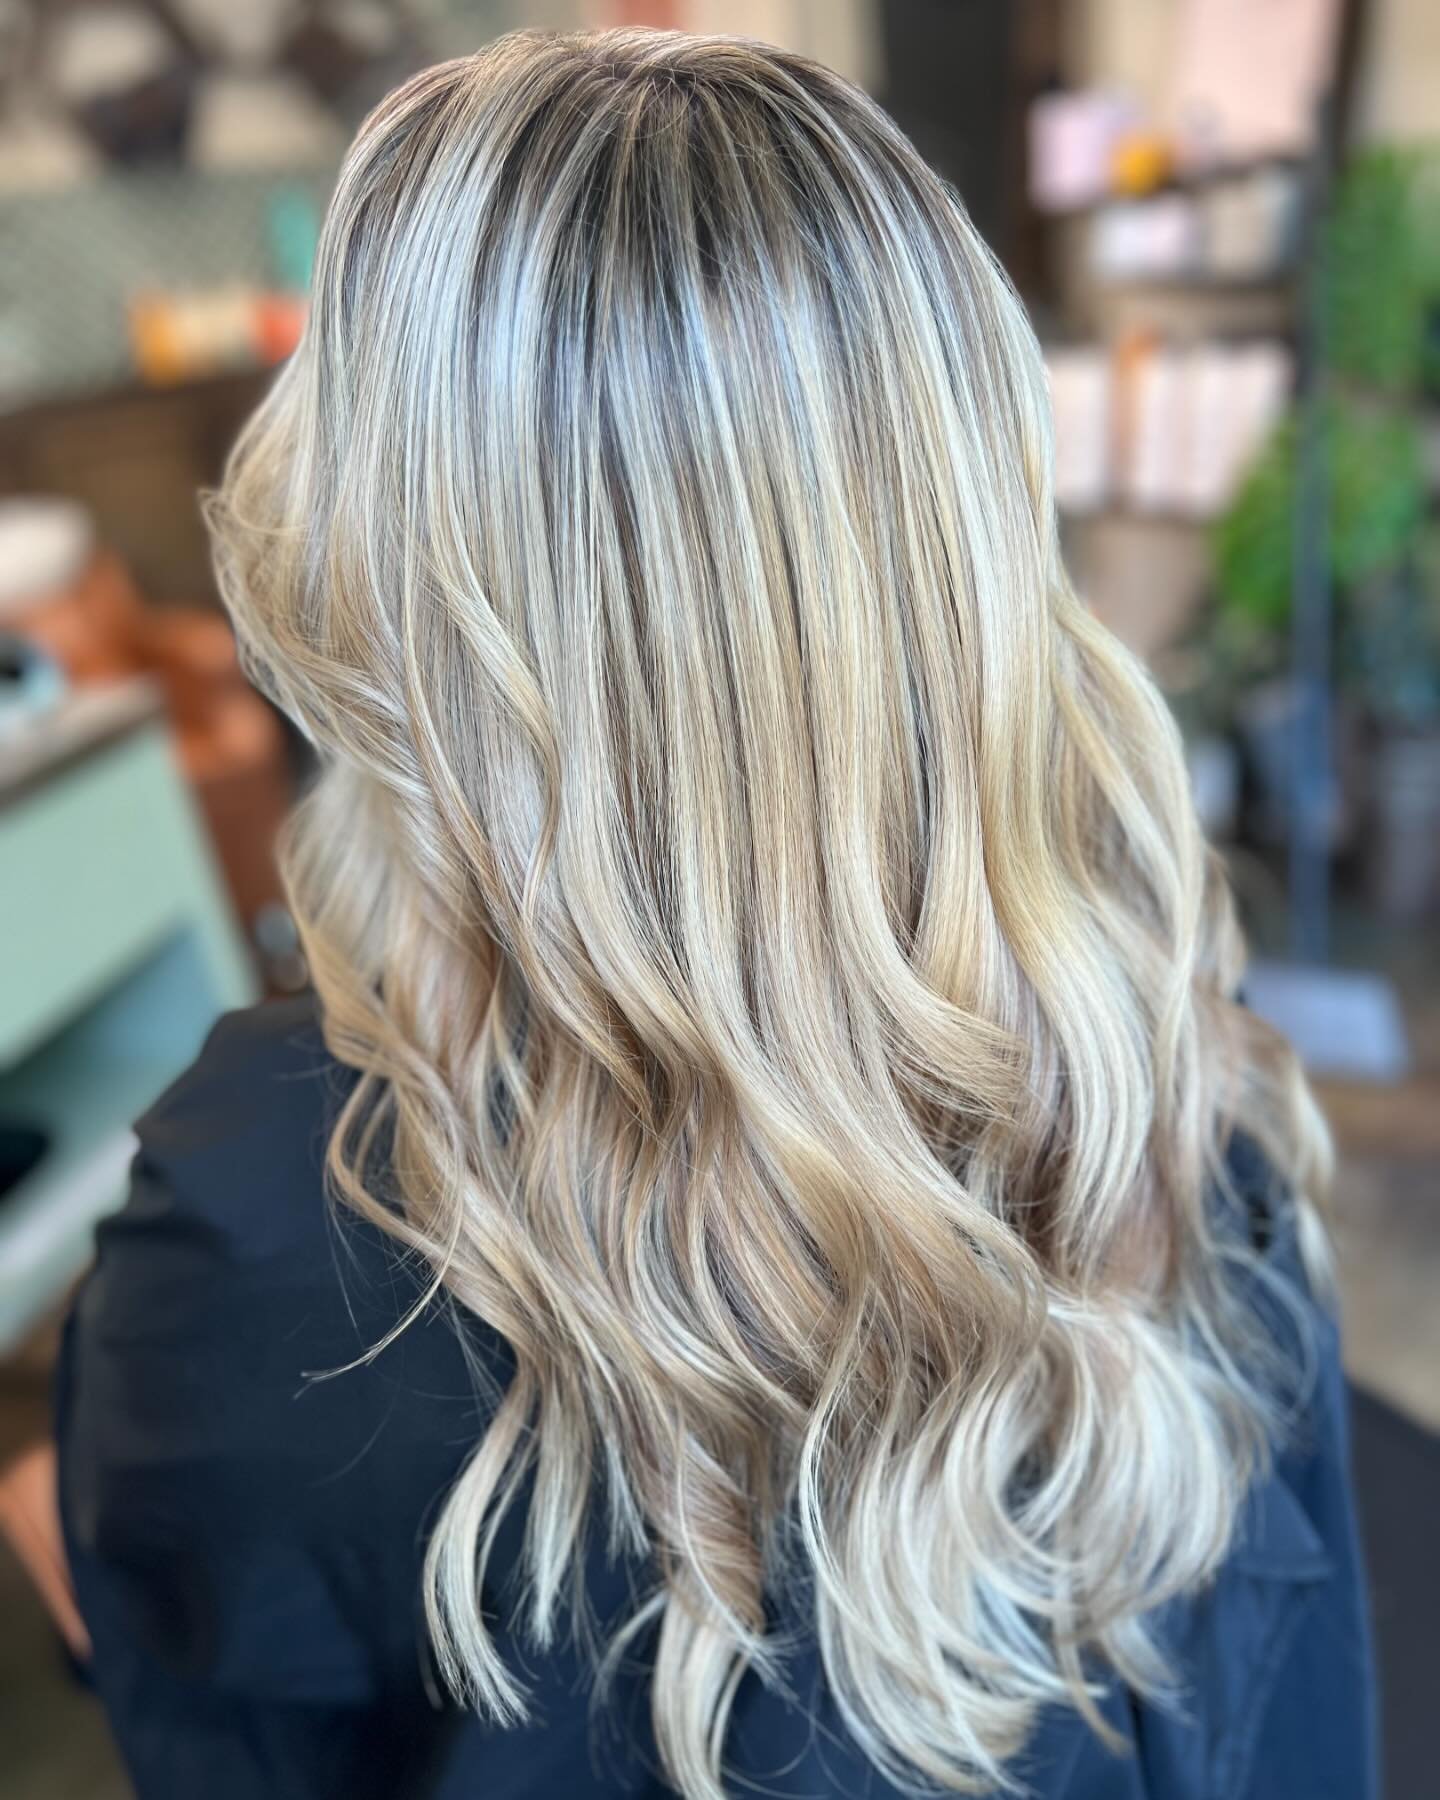 the seasons of maureen ::
We have been many colors, but since last fall we&rsquo;ve been on the trajectory towards a lived in blonde :: however we were coming from COPPER 🔸🔸🔸

Needless to say, when you&rsquo;re patient and consistent we will arriv